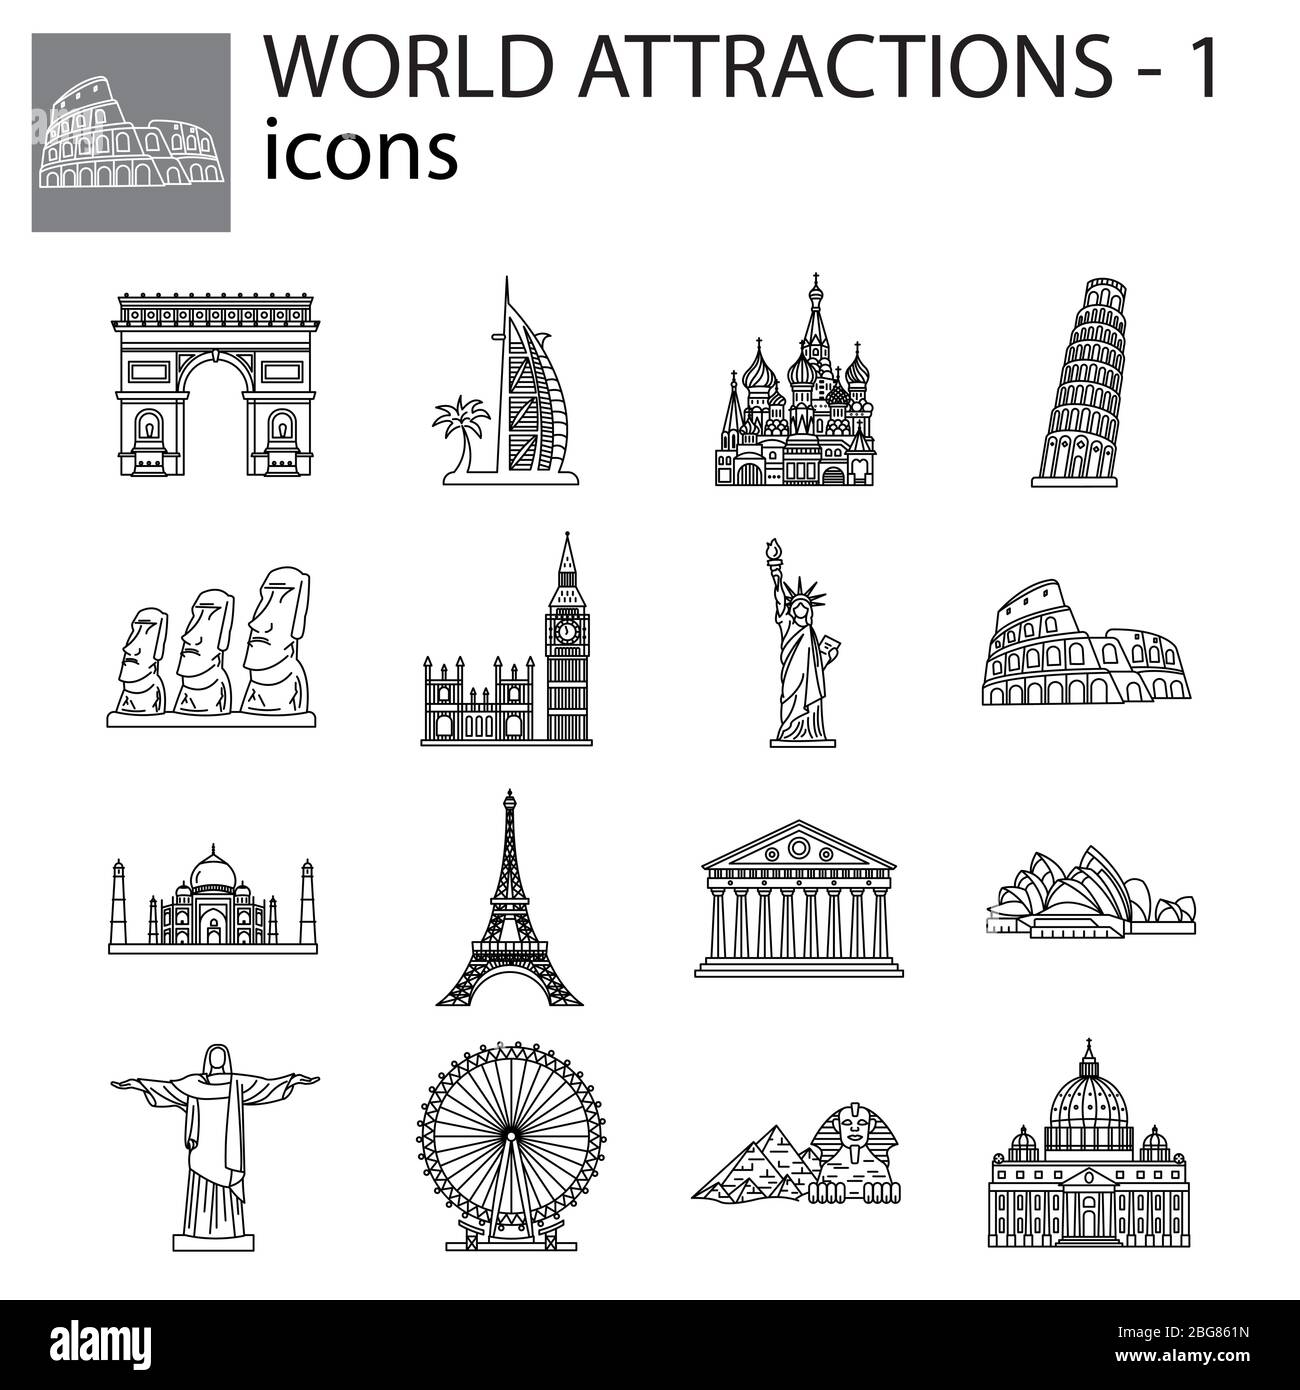 World Attractions vector line icons set, signs, symbols Stock Vector